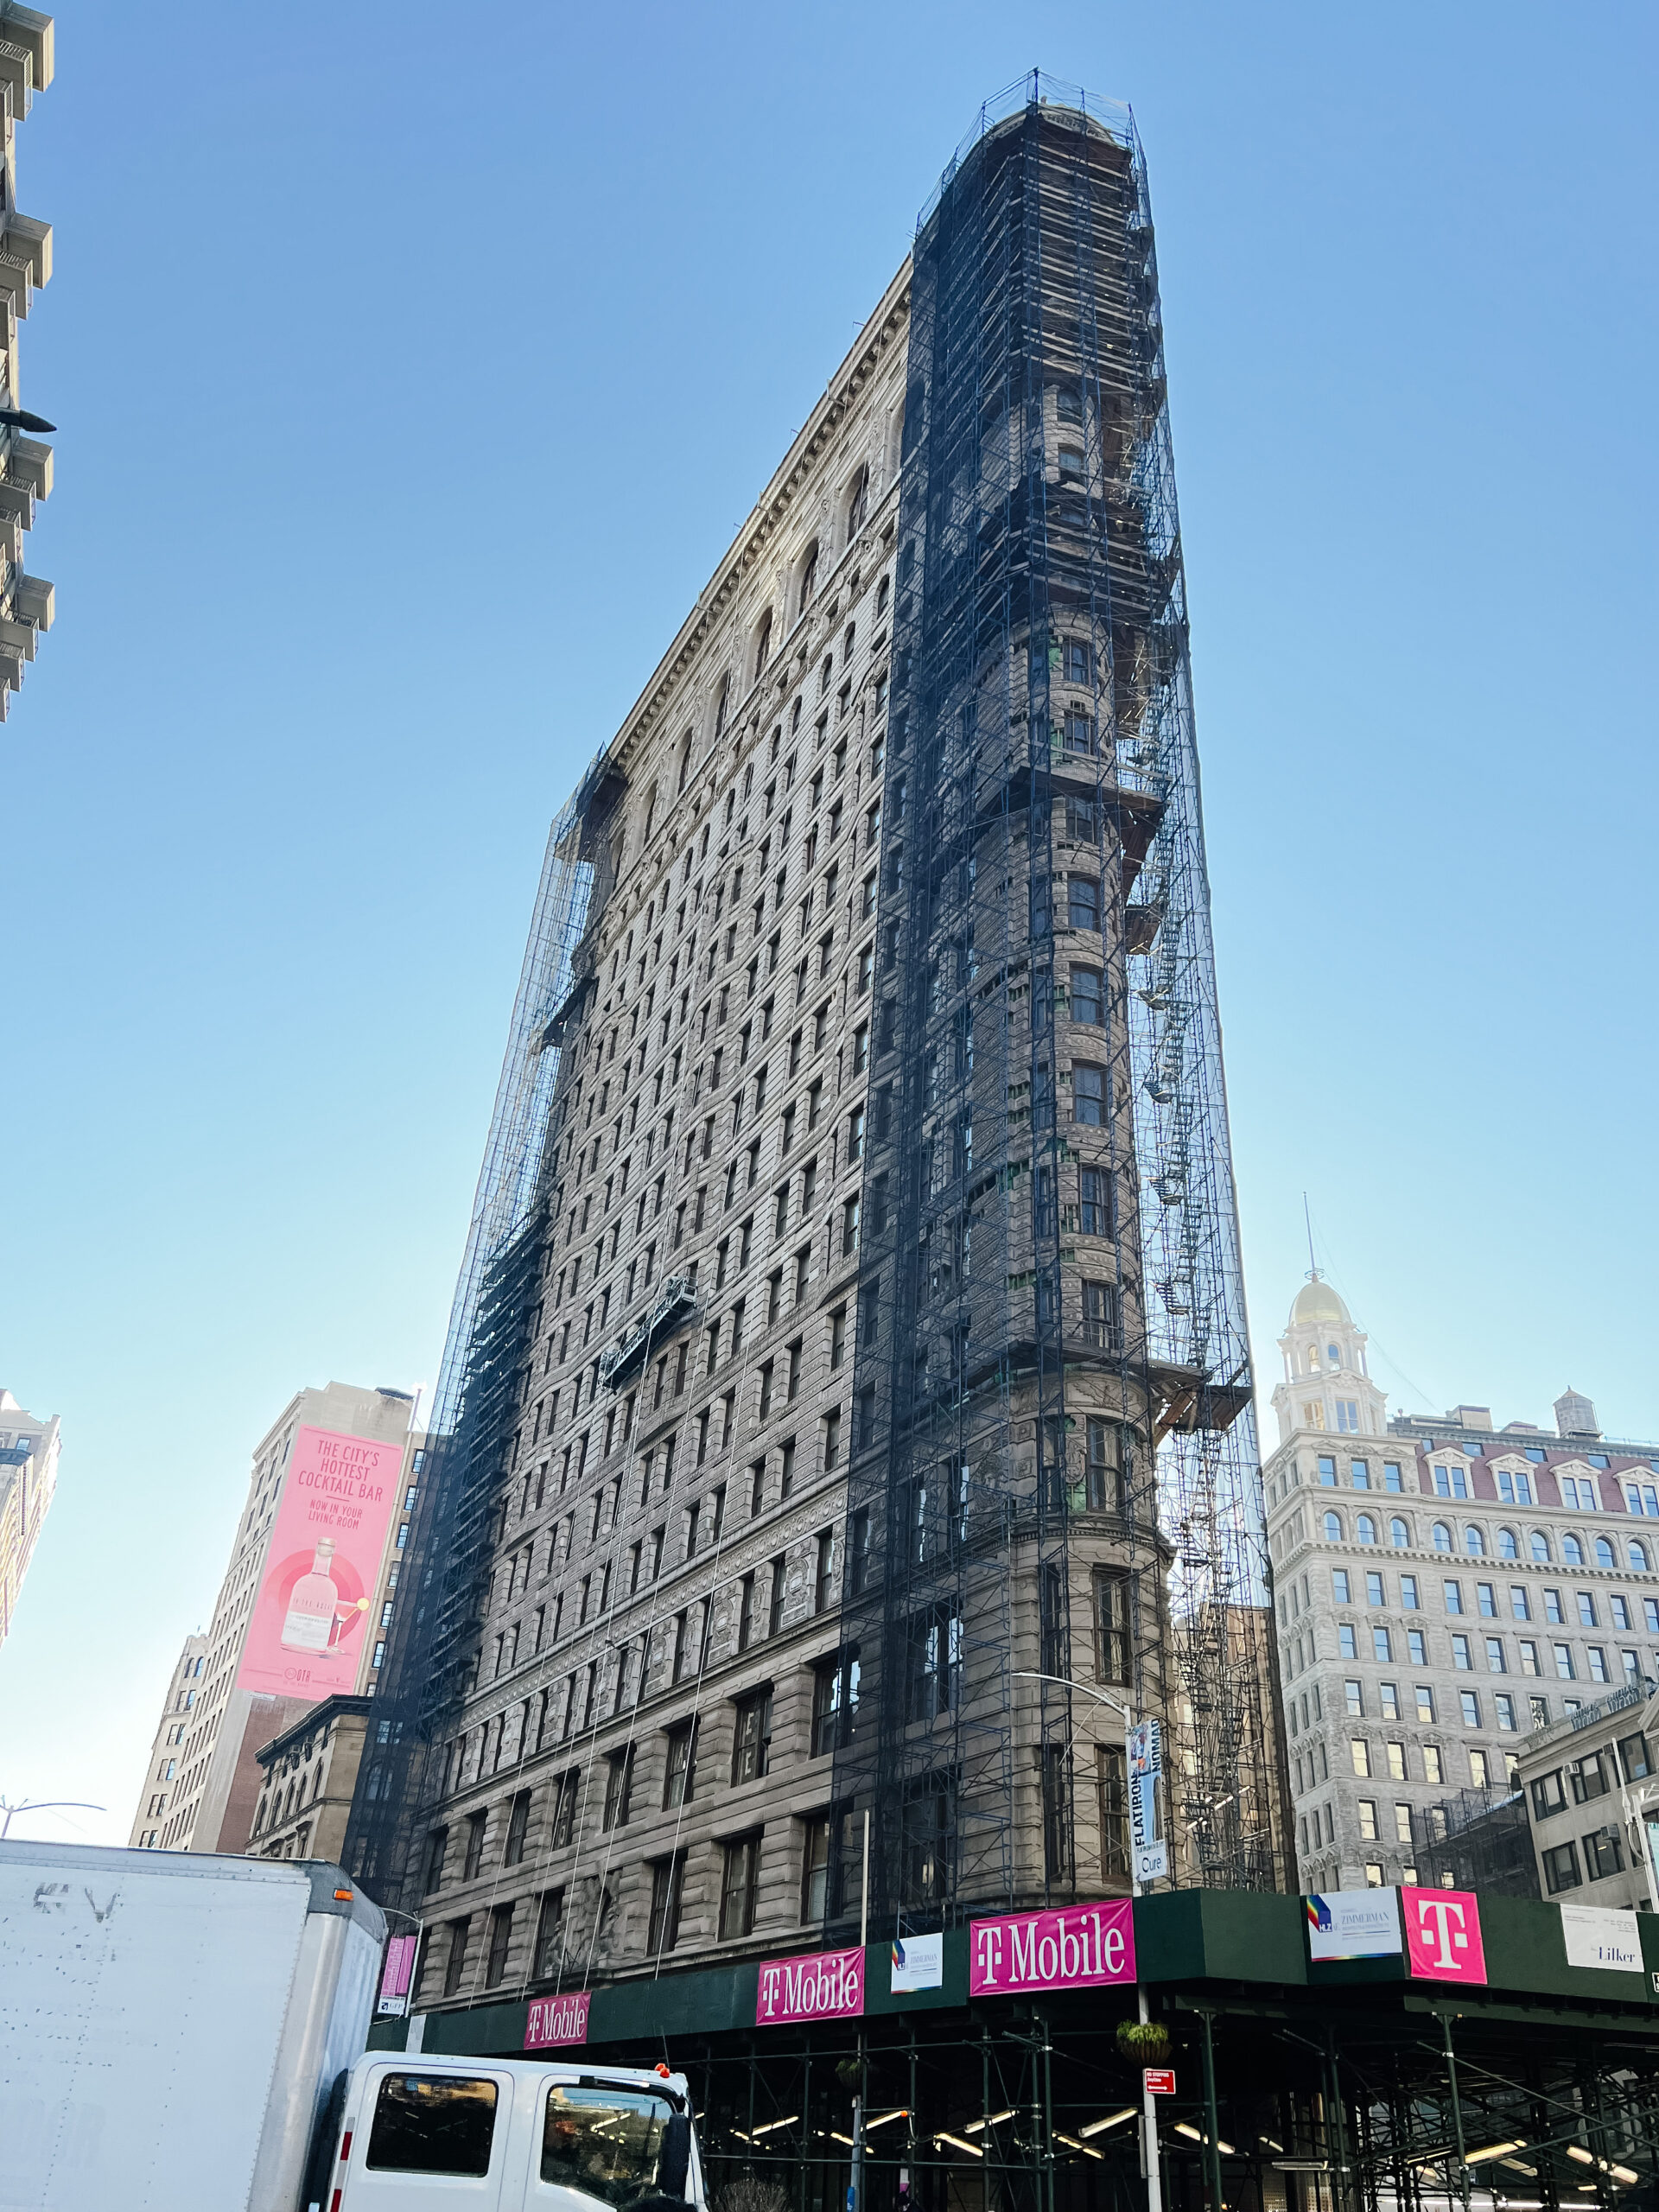 Flat Iron Building in New York City surrounded by scaffolding 